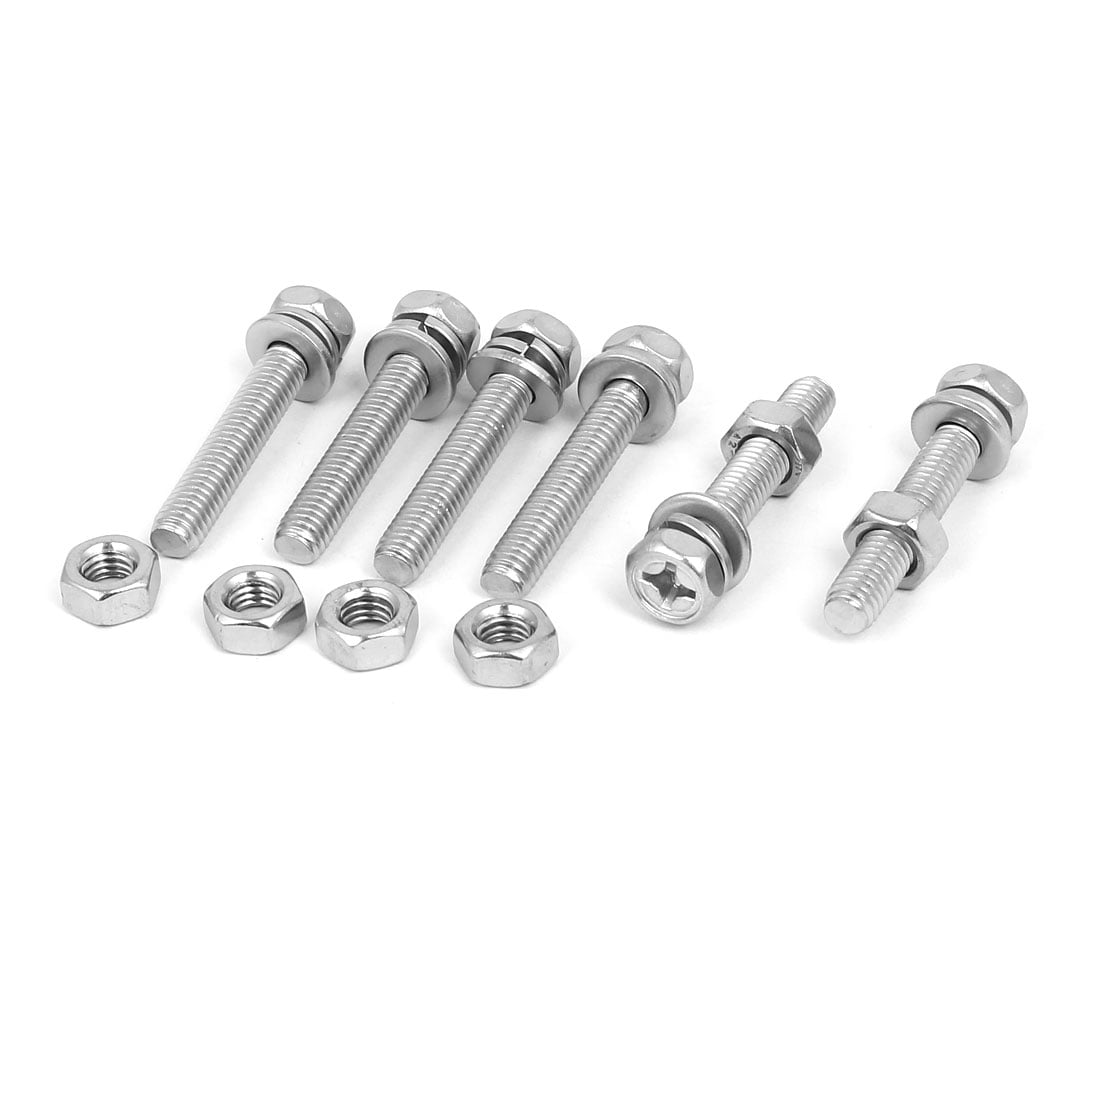 M6 X 25 STAINLESS HEX HEAD BOLTS SET SCREWS 10 PACK 